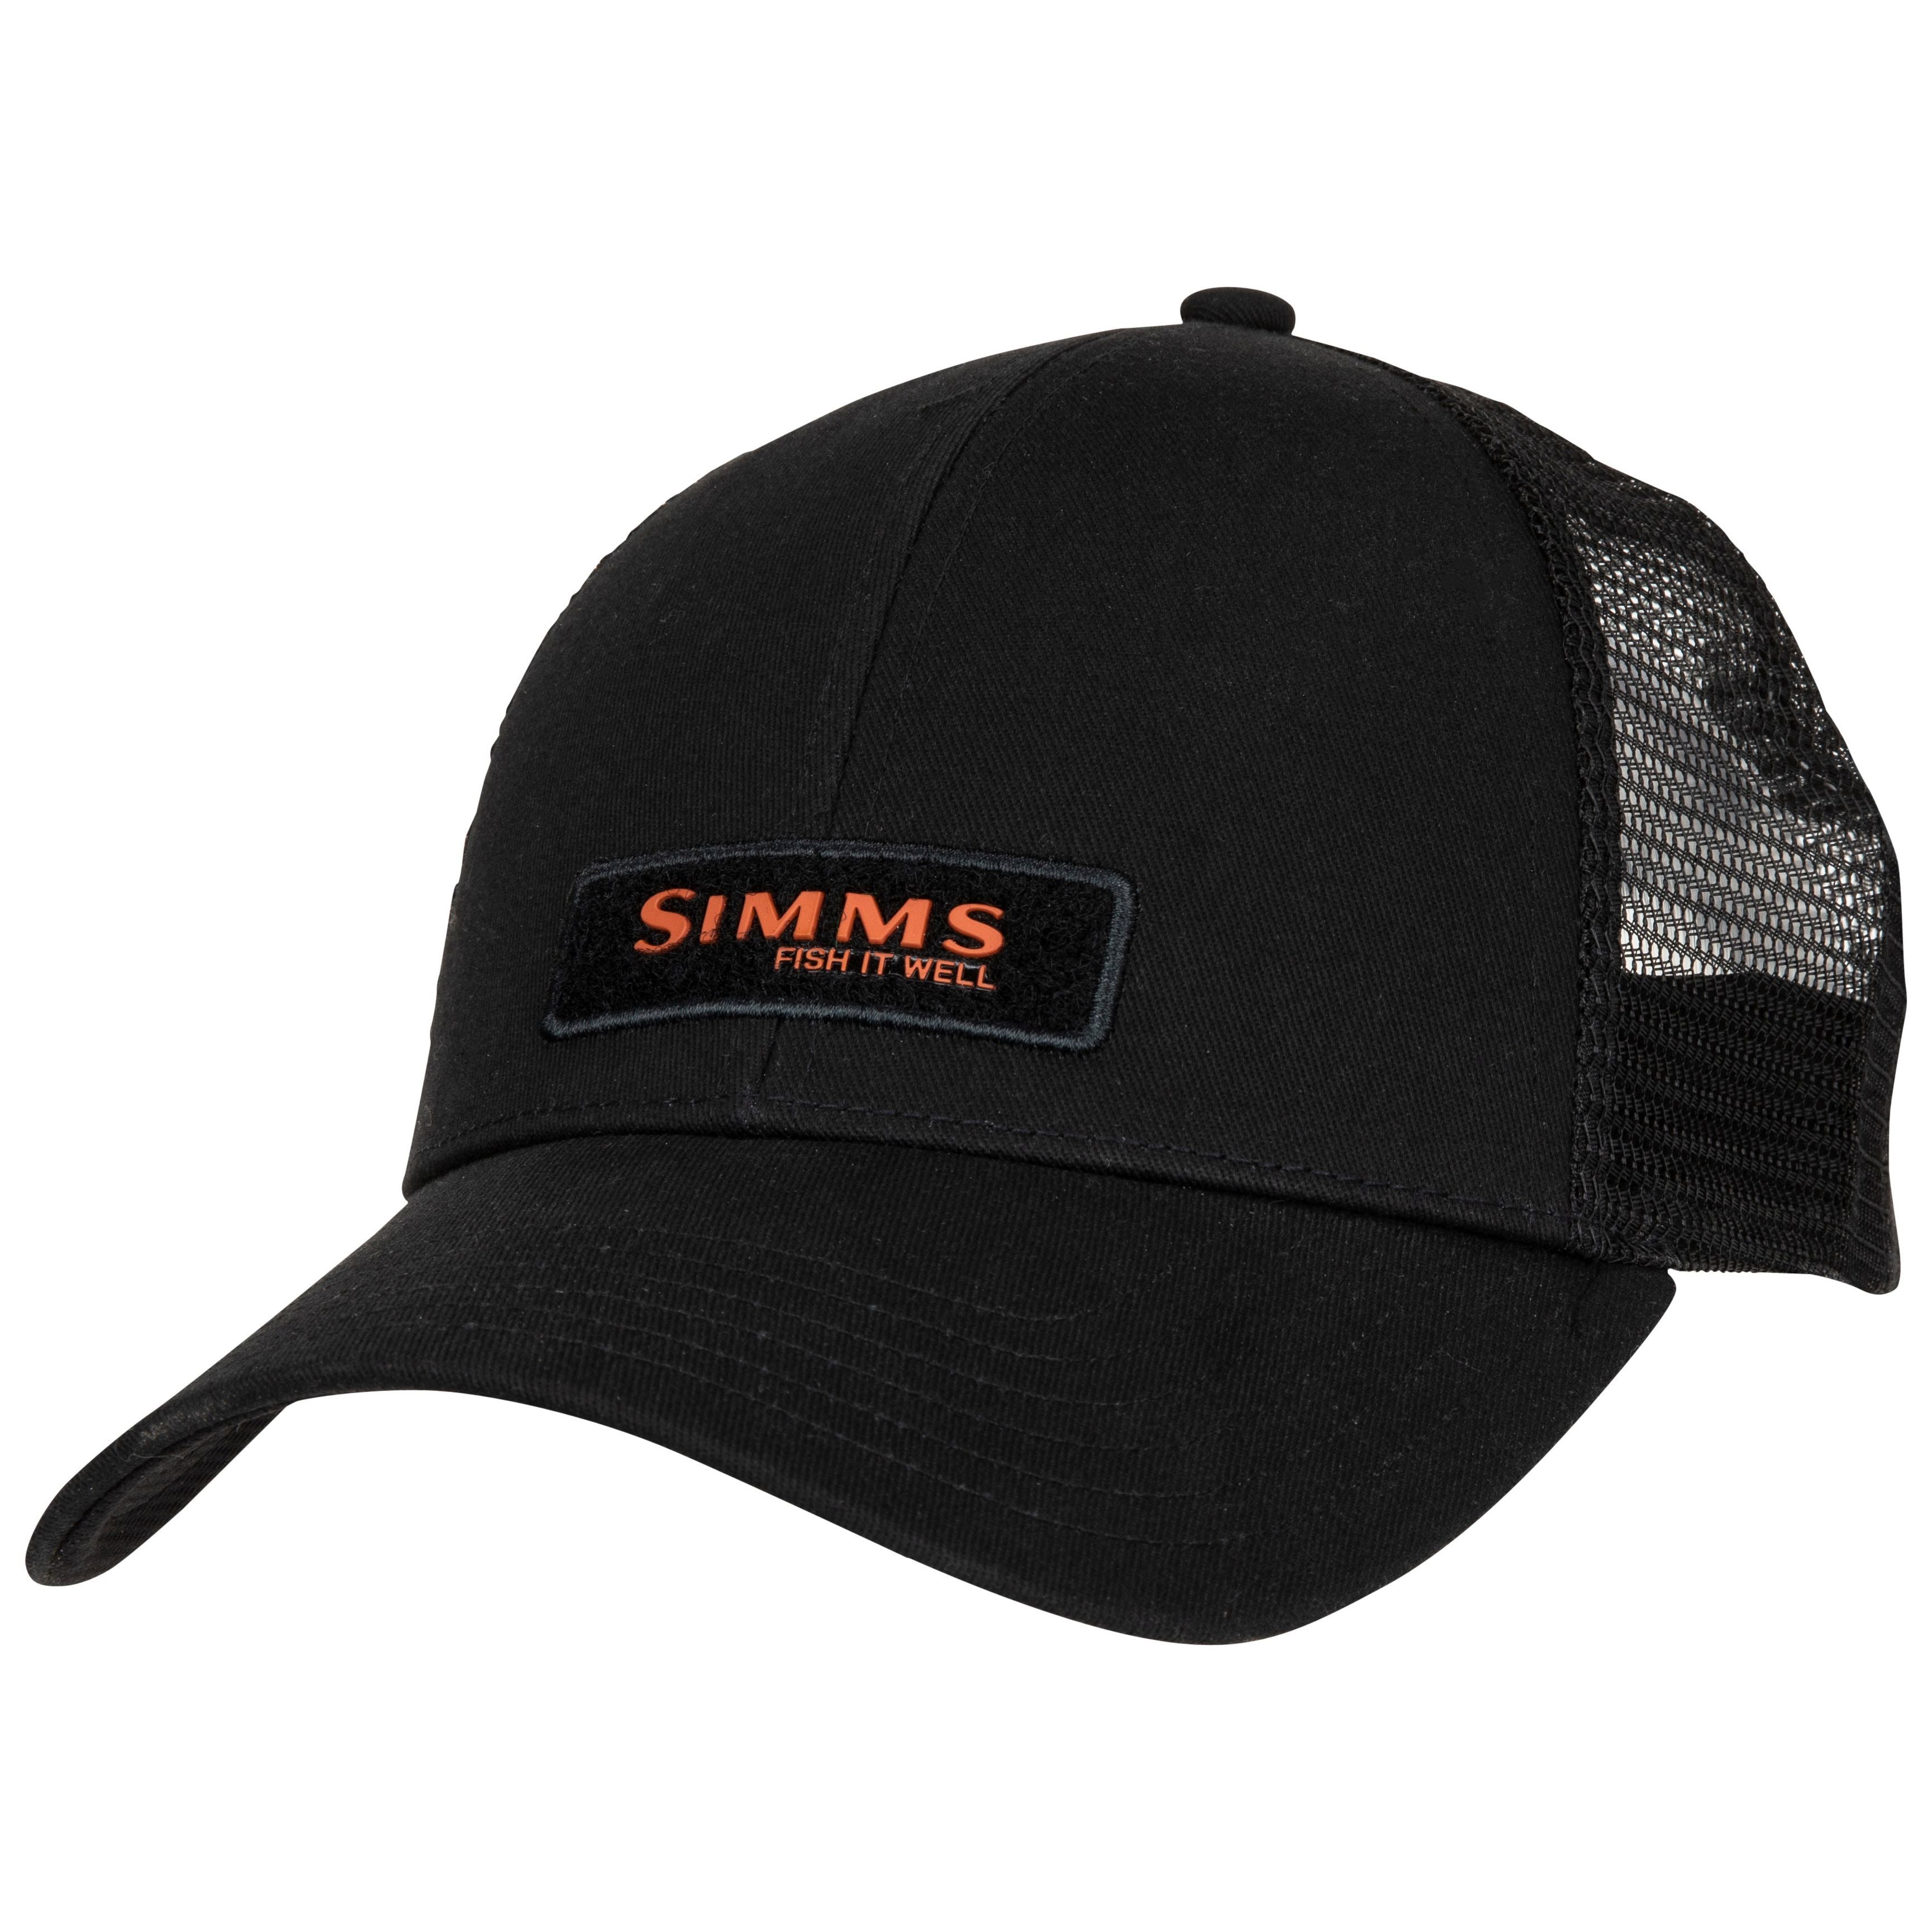 Simms Small Fit Fish It Well Forever Trucker Black Image 01